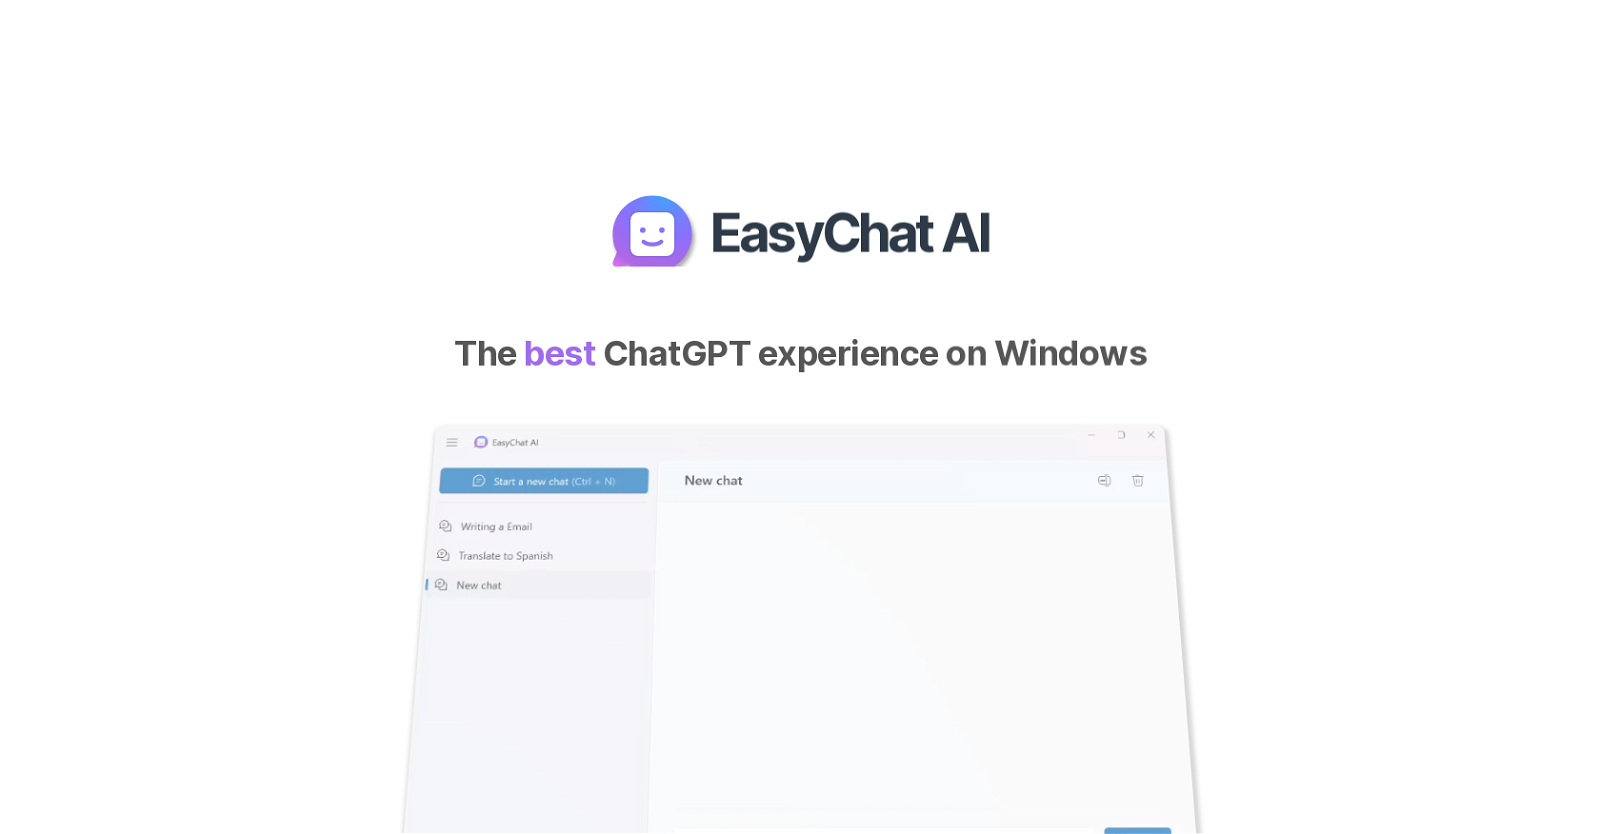 EasyChat AI website